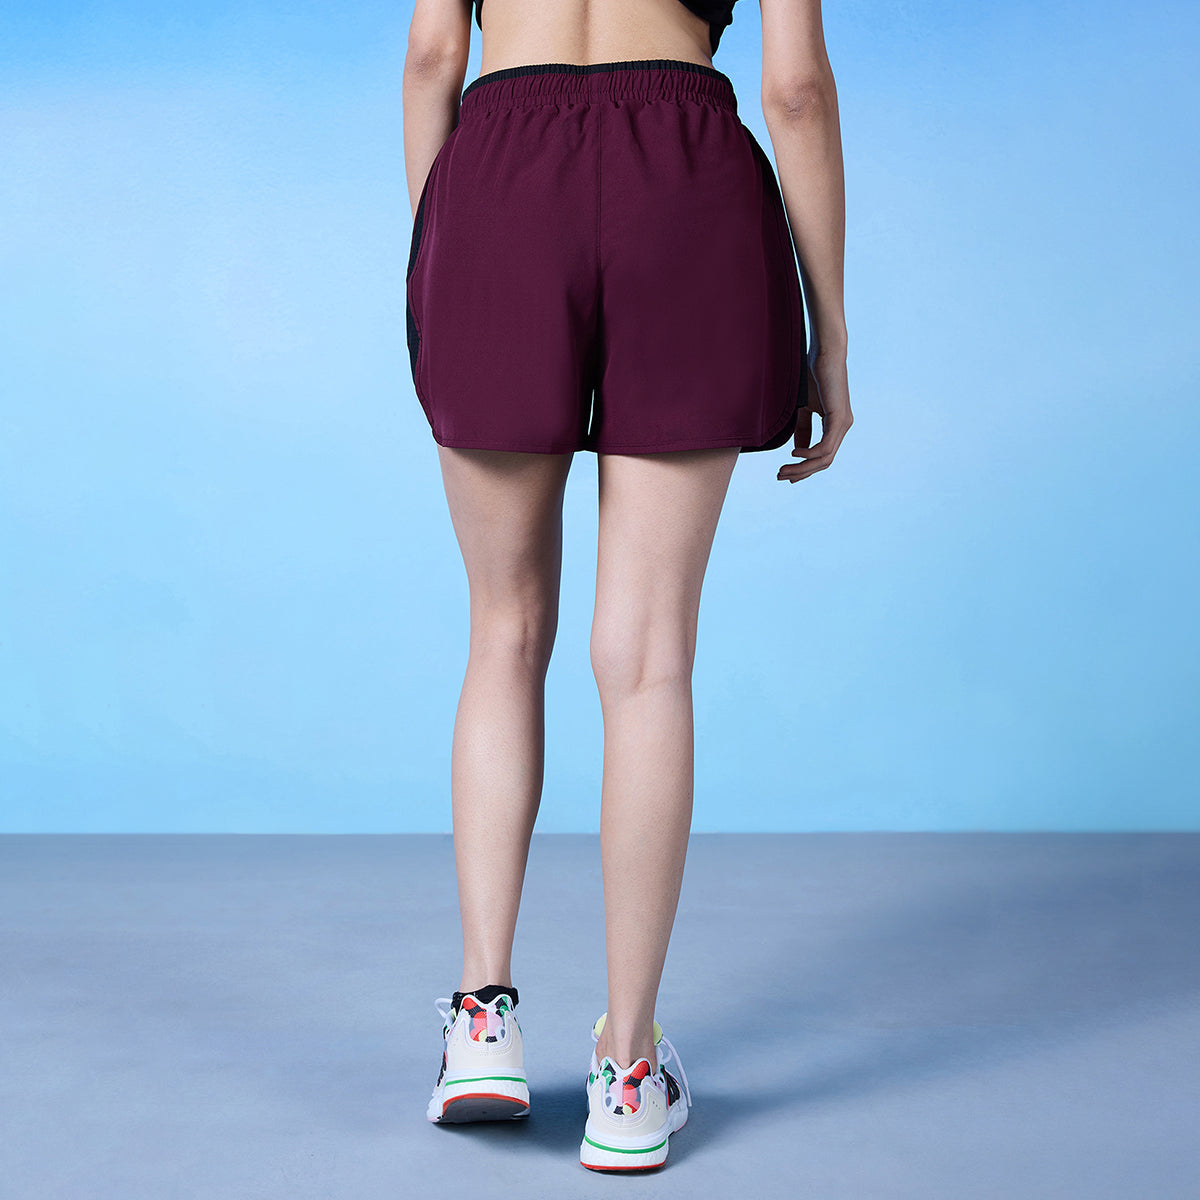 Nykd All Day Woven Athletic Shorts - NYAT275 - Red violet